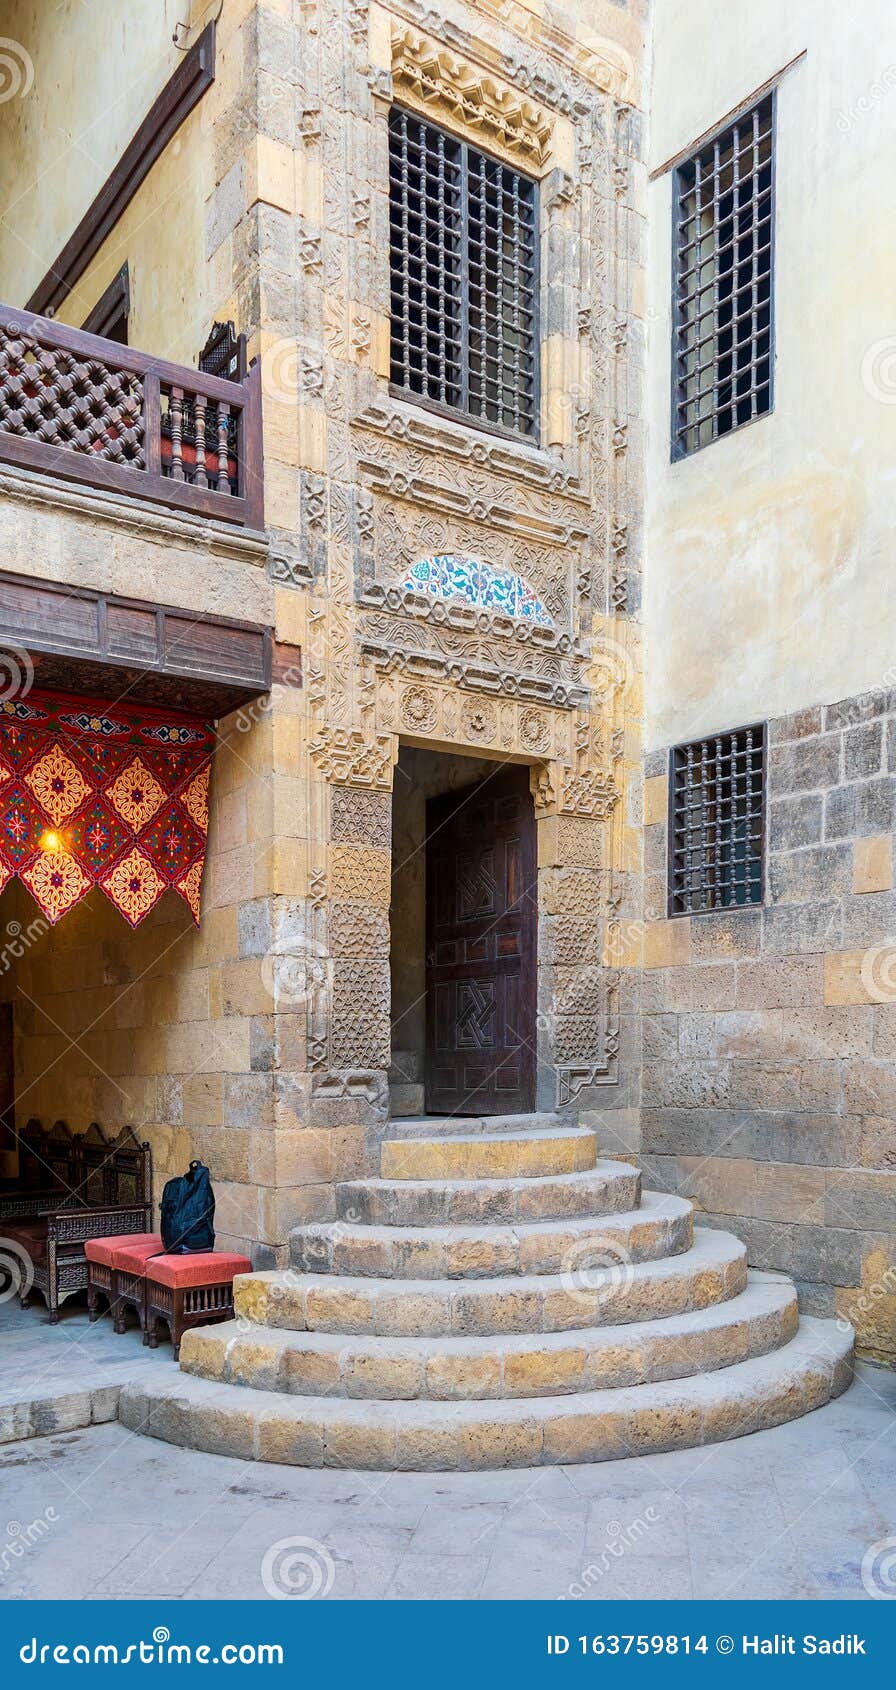 stone staircase and wooden door leading to old mamluk era beit el sennary building, cairo, egypt